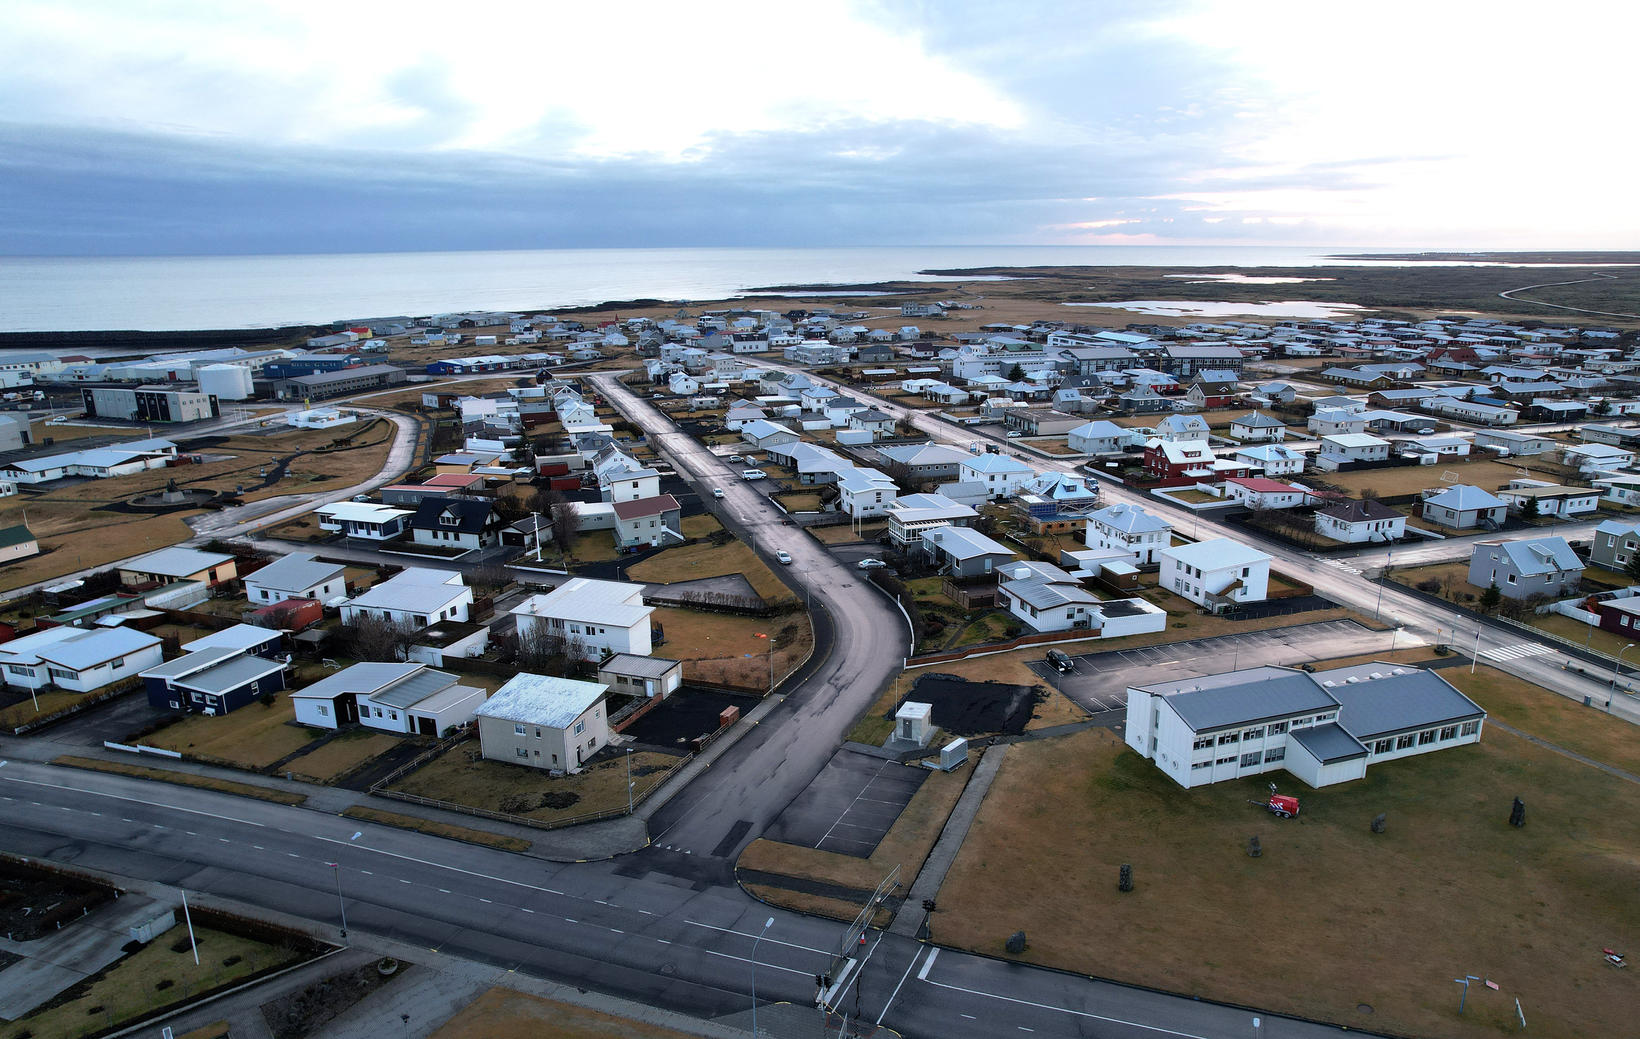 A view over the empty town of Grindavík.